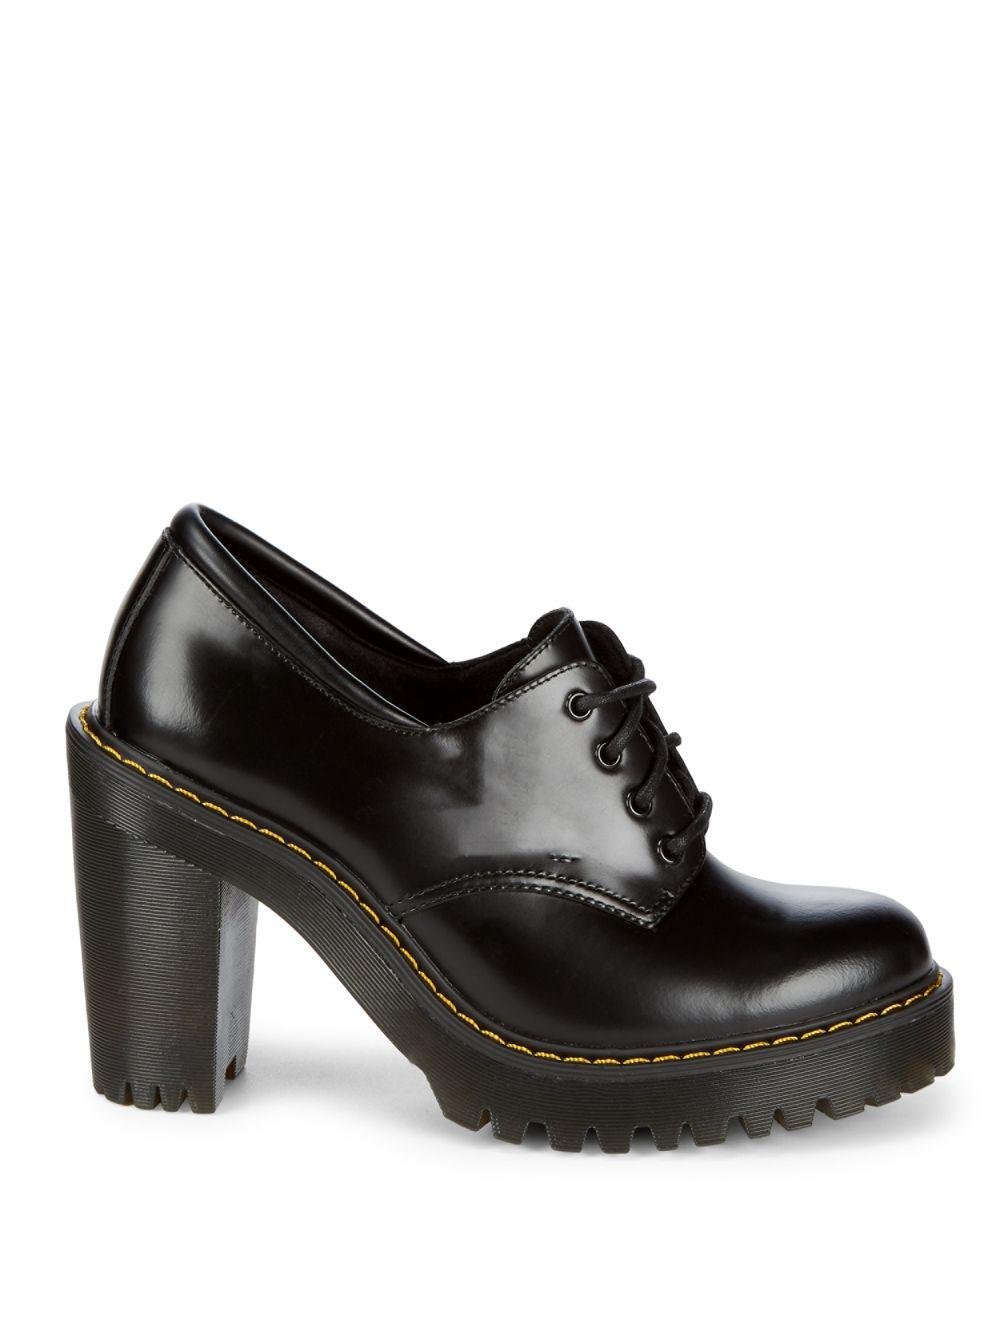 Dr. Martens Leather Salome Lace-up Heels in Black | Lyst Australia